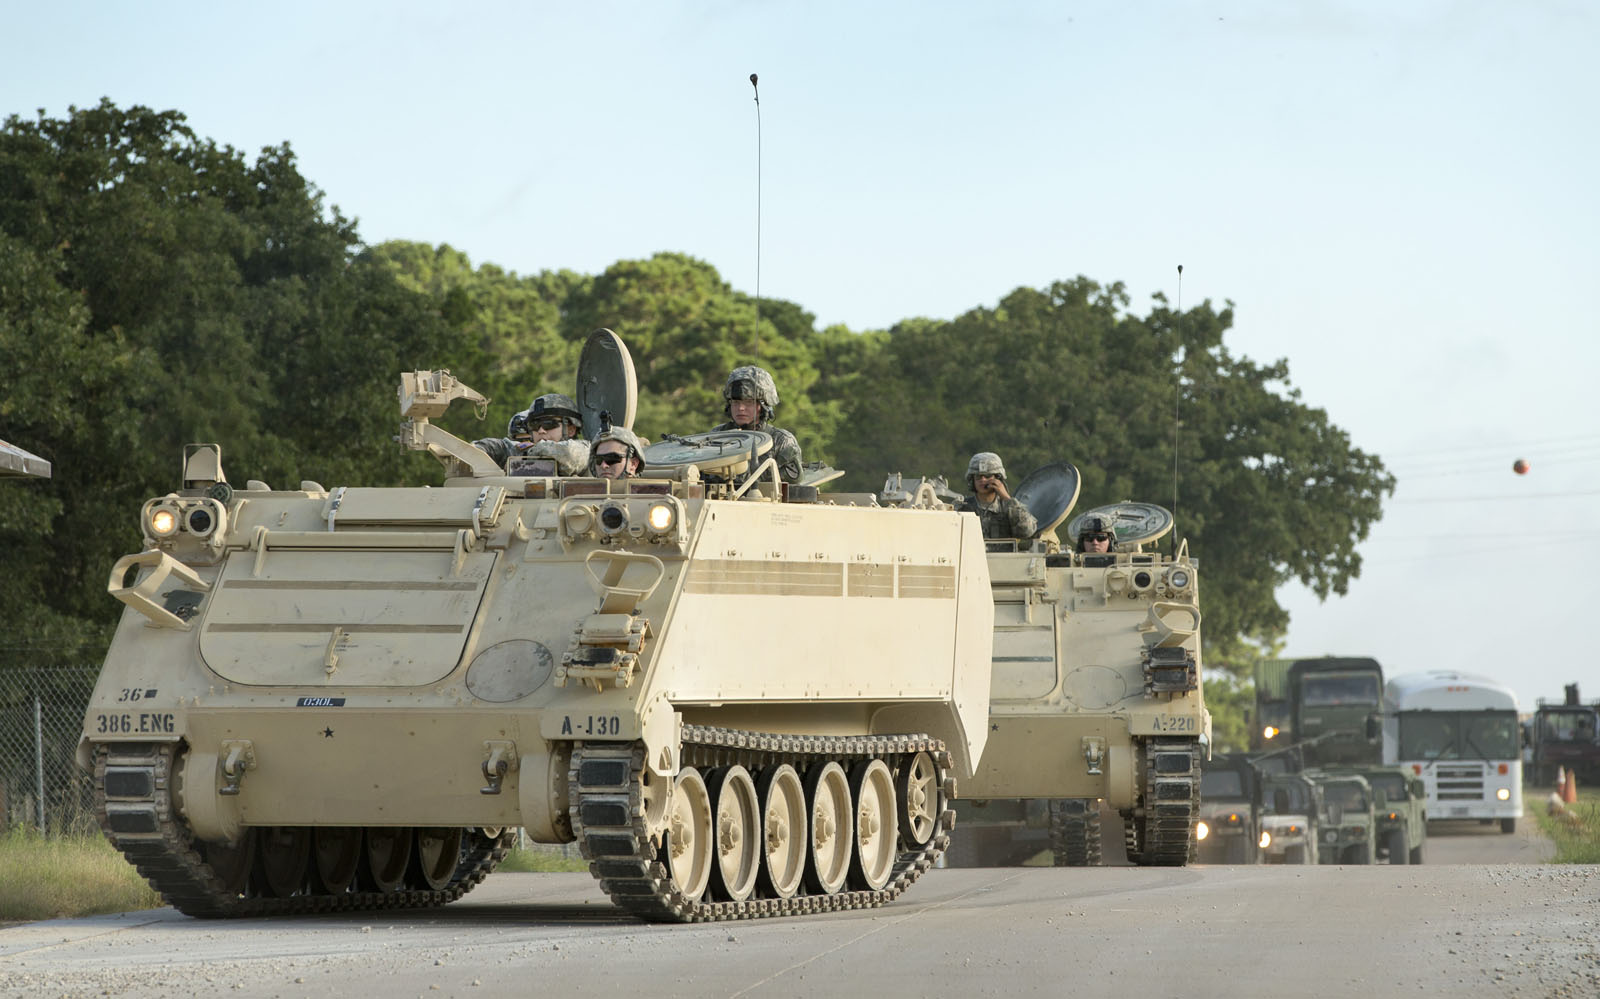 Looking Back At Operation Jade Helm The Controversial Military Exercise